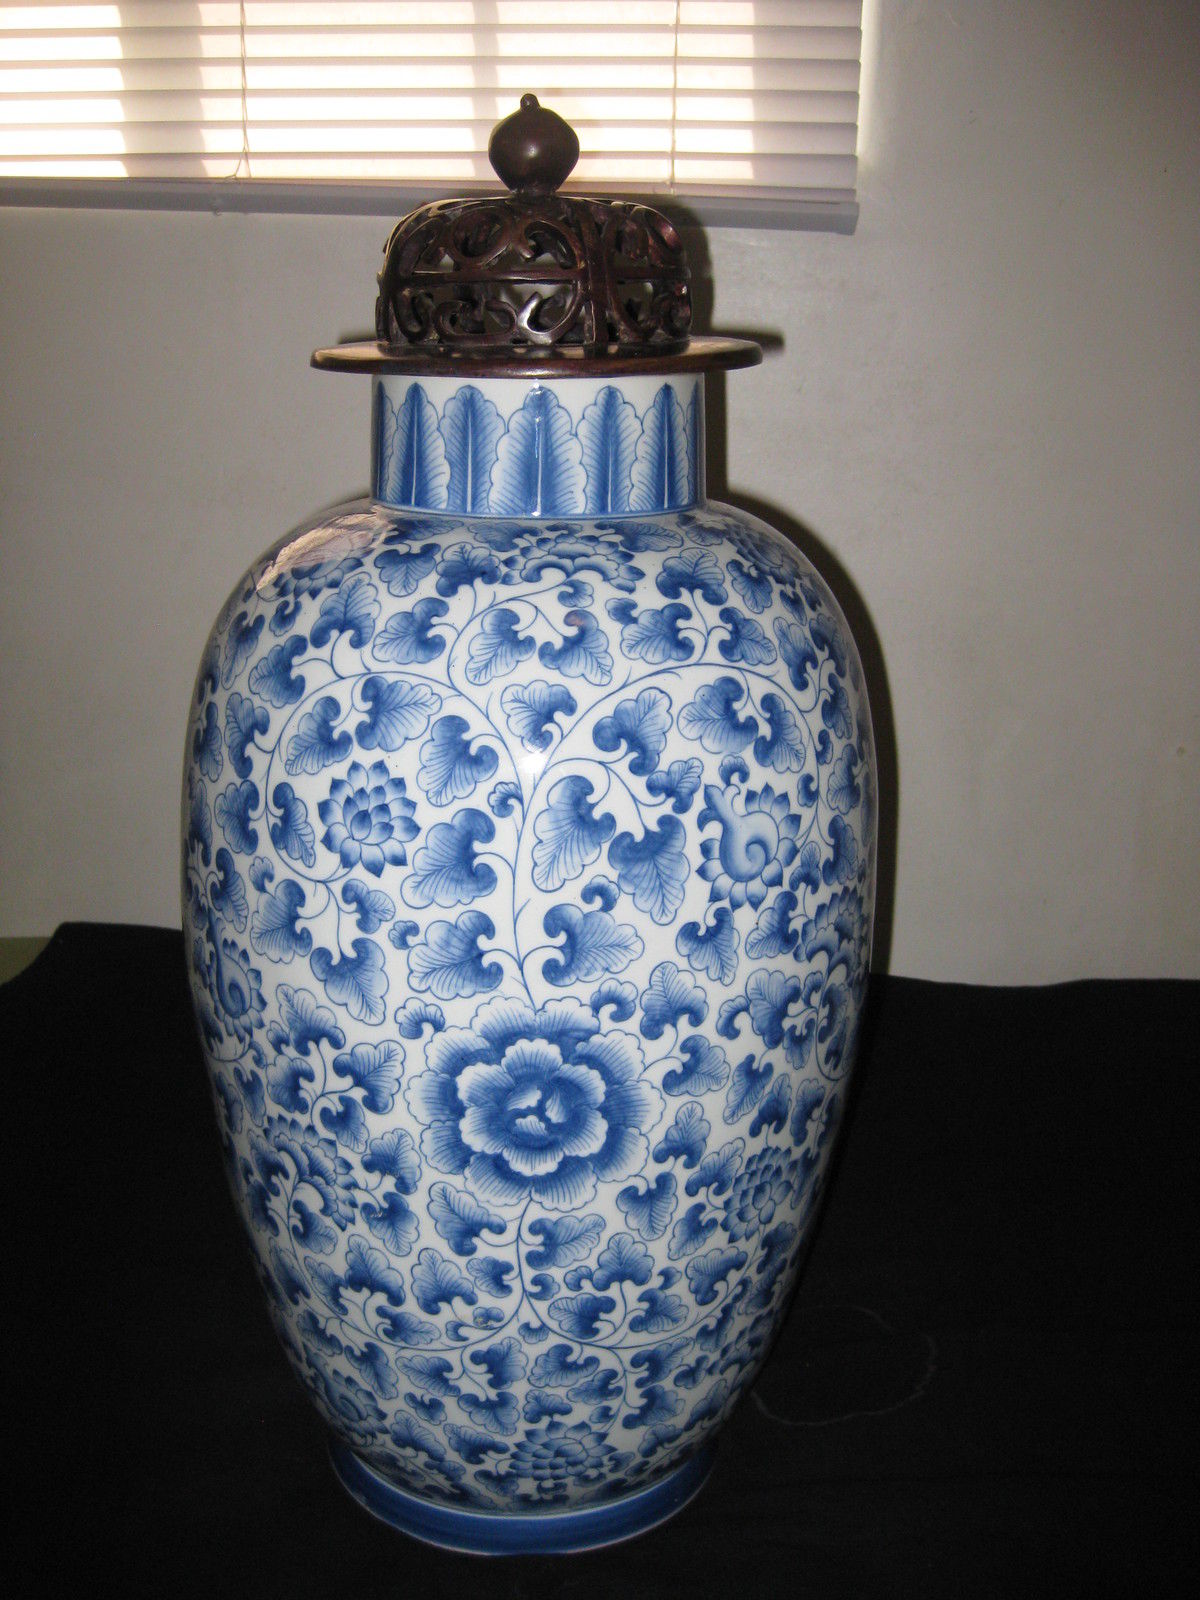 ANTIQUE CHINESE PORCELAIN BLUE AND WHITE VASE,19TH CENTURY WITH SOLID BRONZE LID